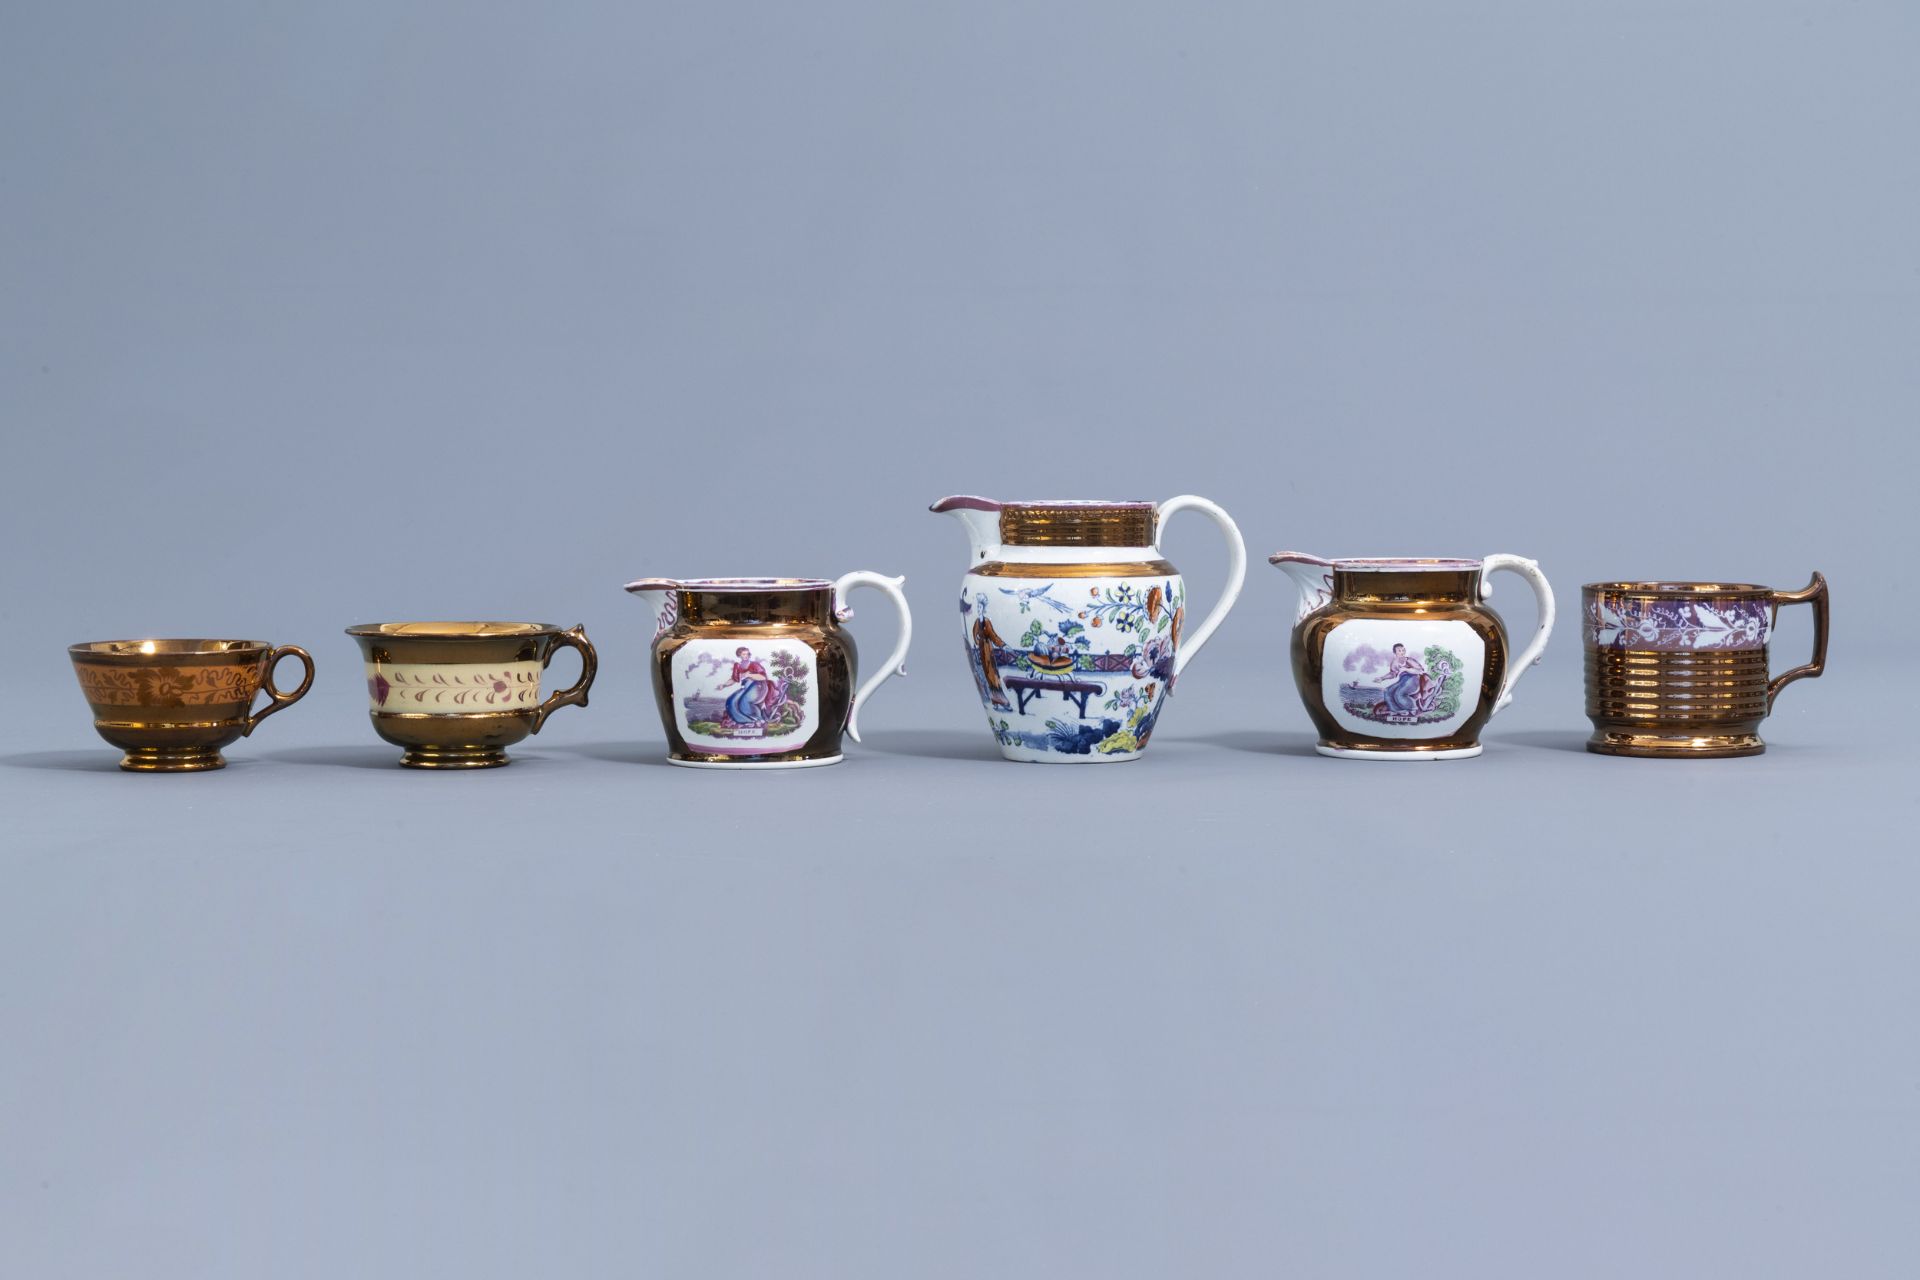 A varied collection of English lustreware items, 19th C. - Image 19 of 44